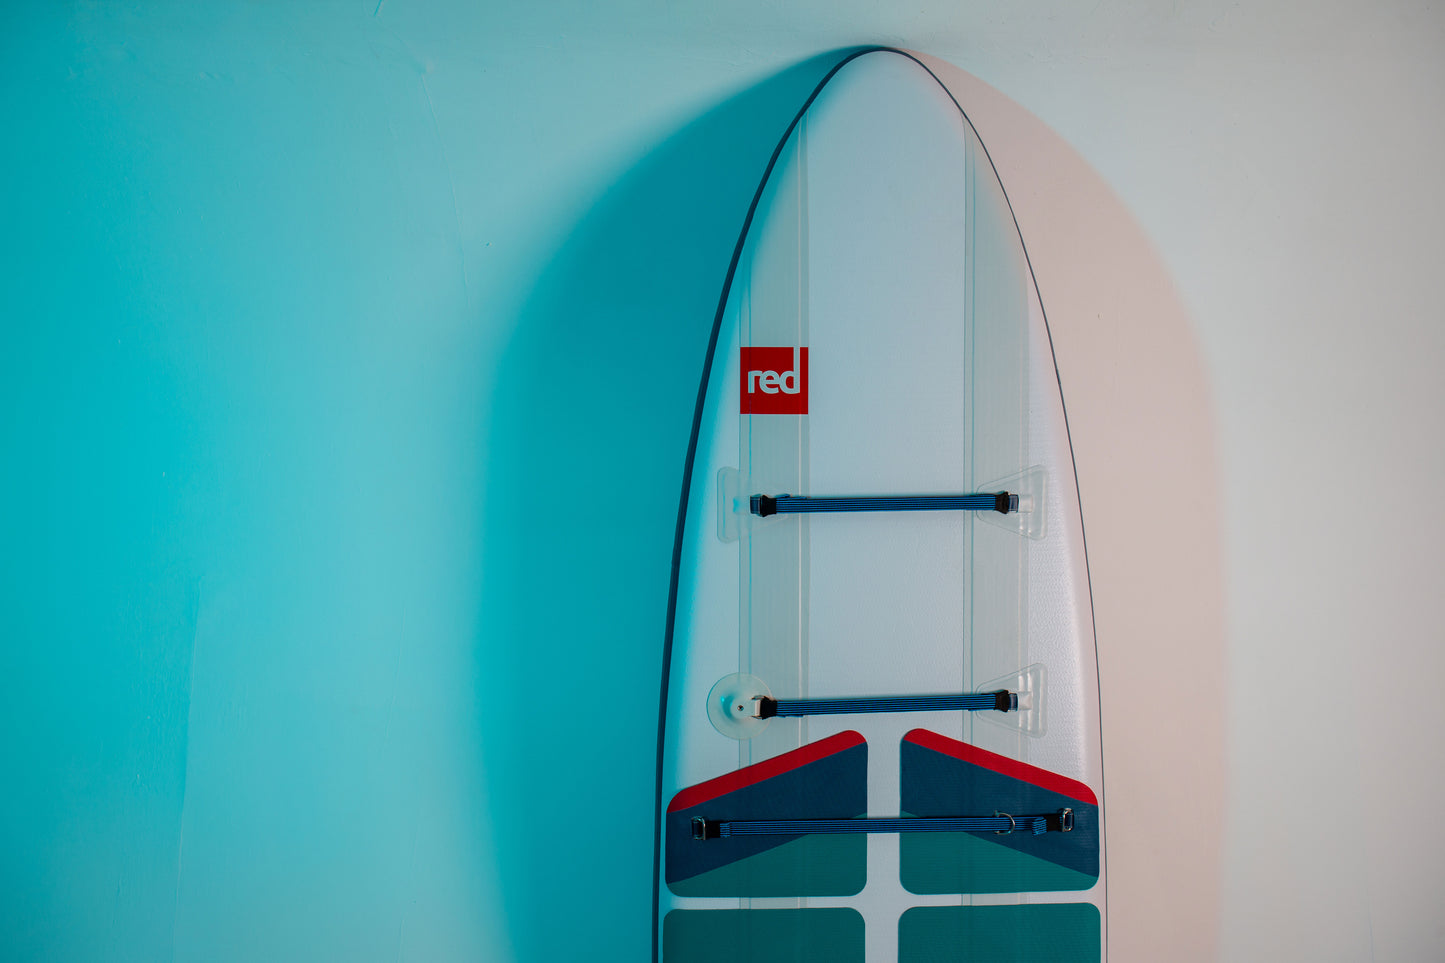 Copenhagen Surf Shop 2022 Red Paddle Co 12'0" COMPACT TOURING MSL Oppustelig Stand Up Paddle SUP iSUP Board , Taske, Titan 2 Pumpe, Hybrid Tough Paddle & Leash